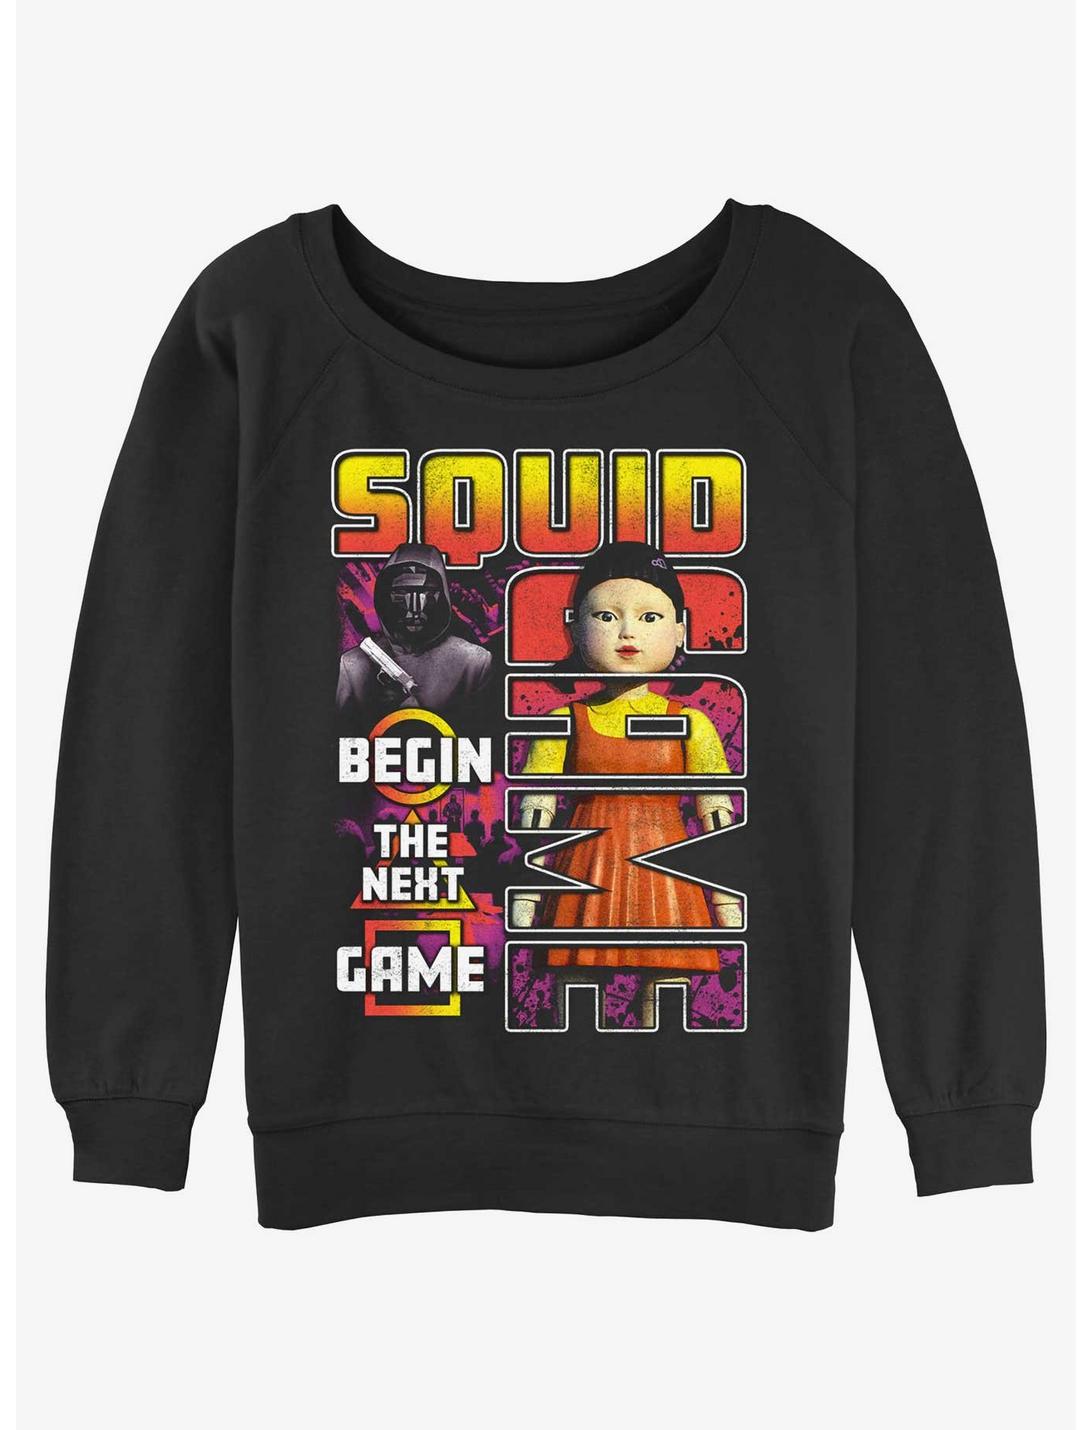 Squid Game Masked Man and Young-Hee Doll Star The Next Game Womens Slouchy Sweatshirt, BLACK, hi-res